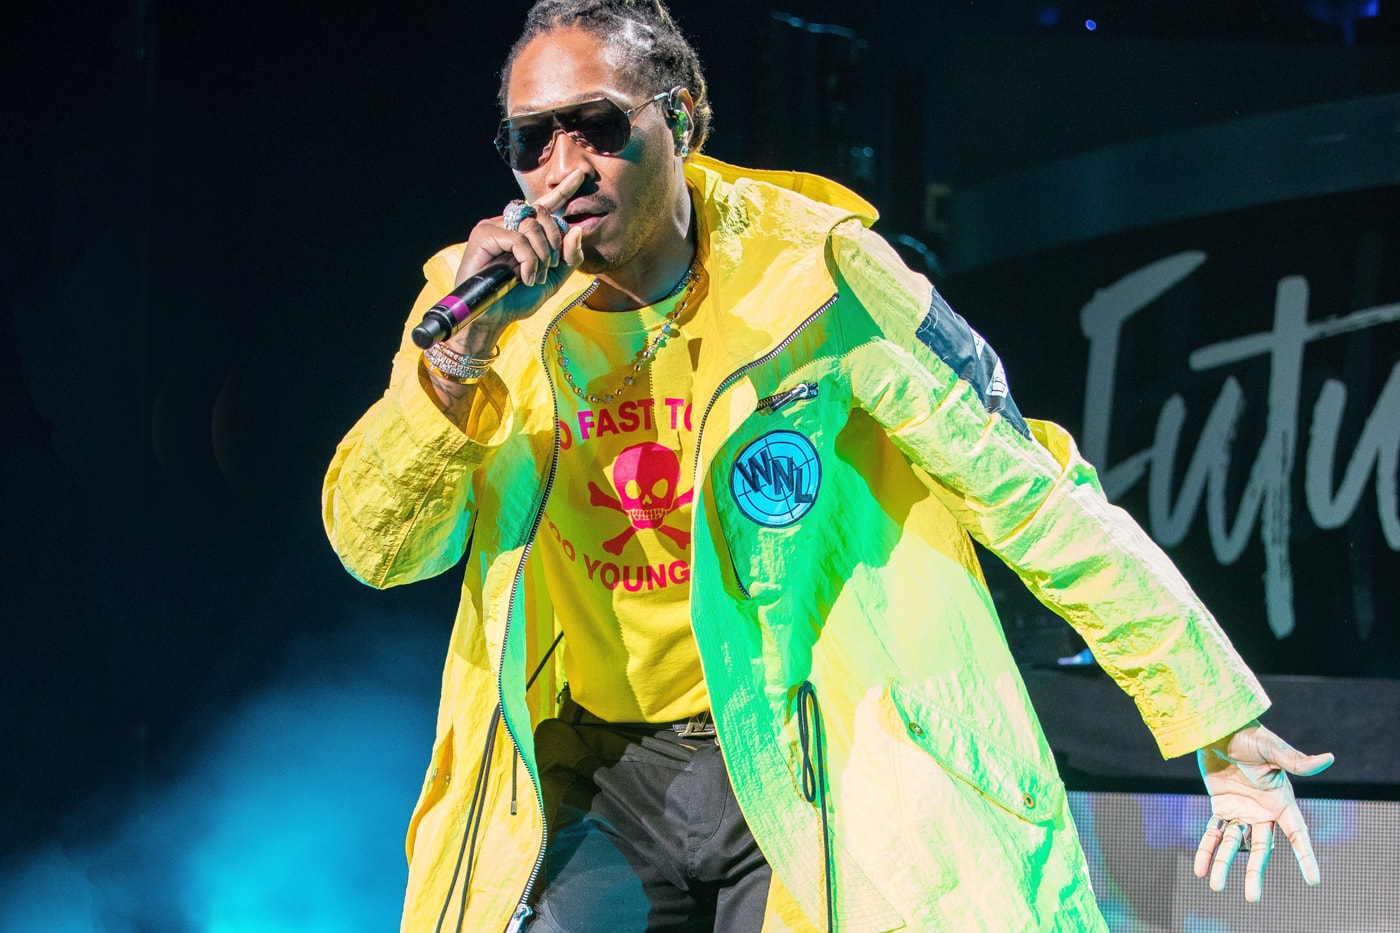 Future is the First Artist With Back-to-Back No. 1 Album Debuts